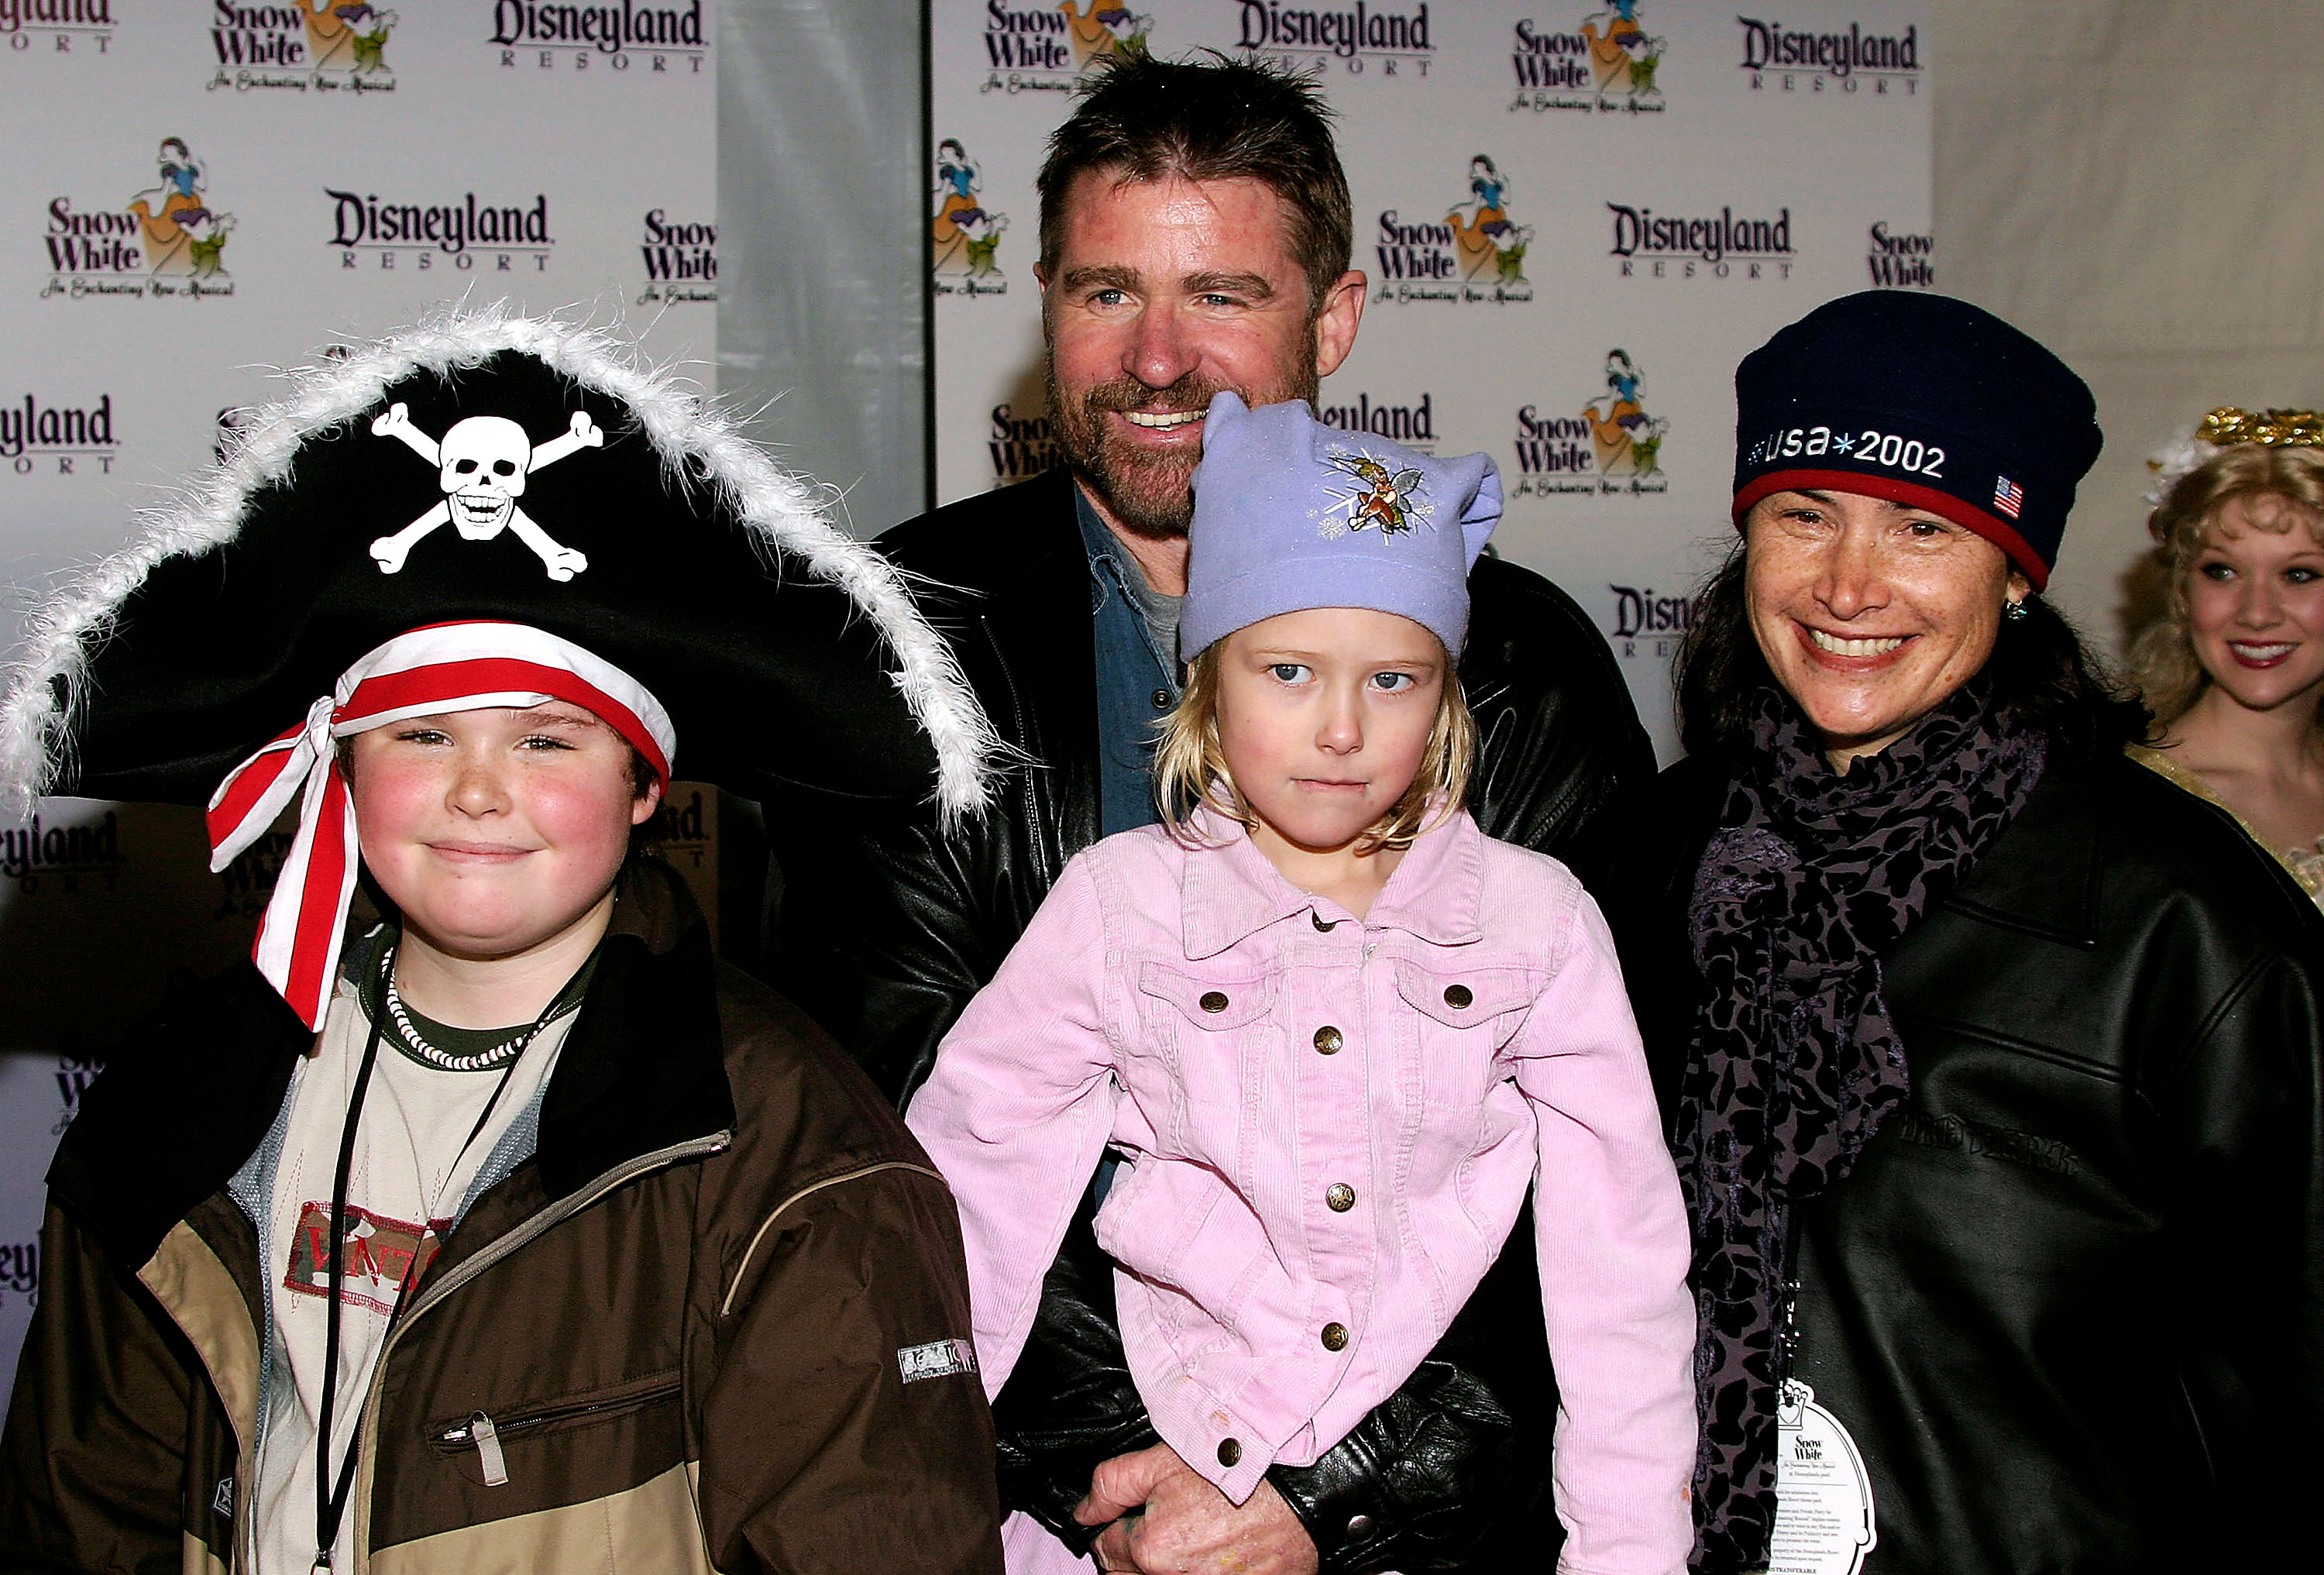 Treat Williams and family on February 21, 2004 in Disneyland, California | Source: Getty Images